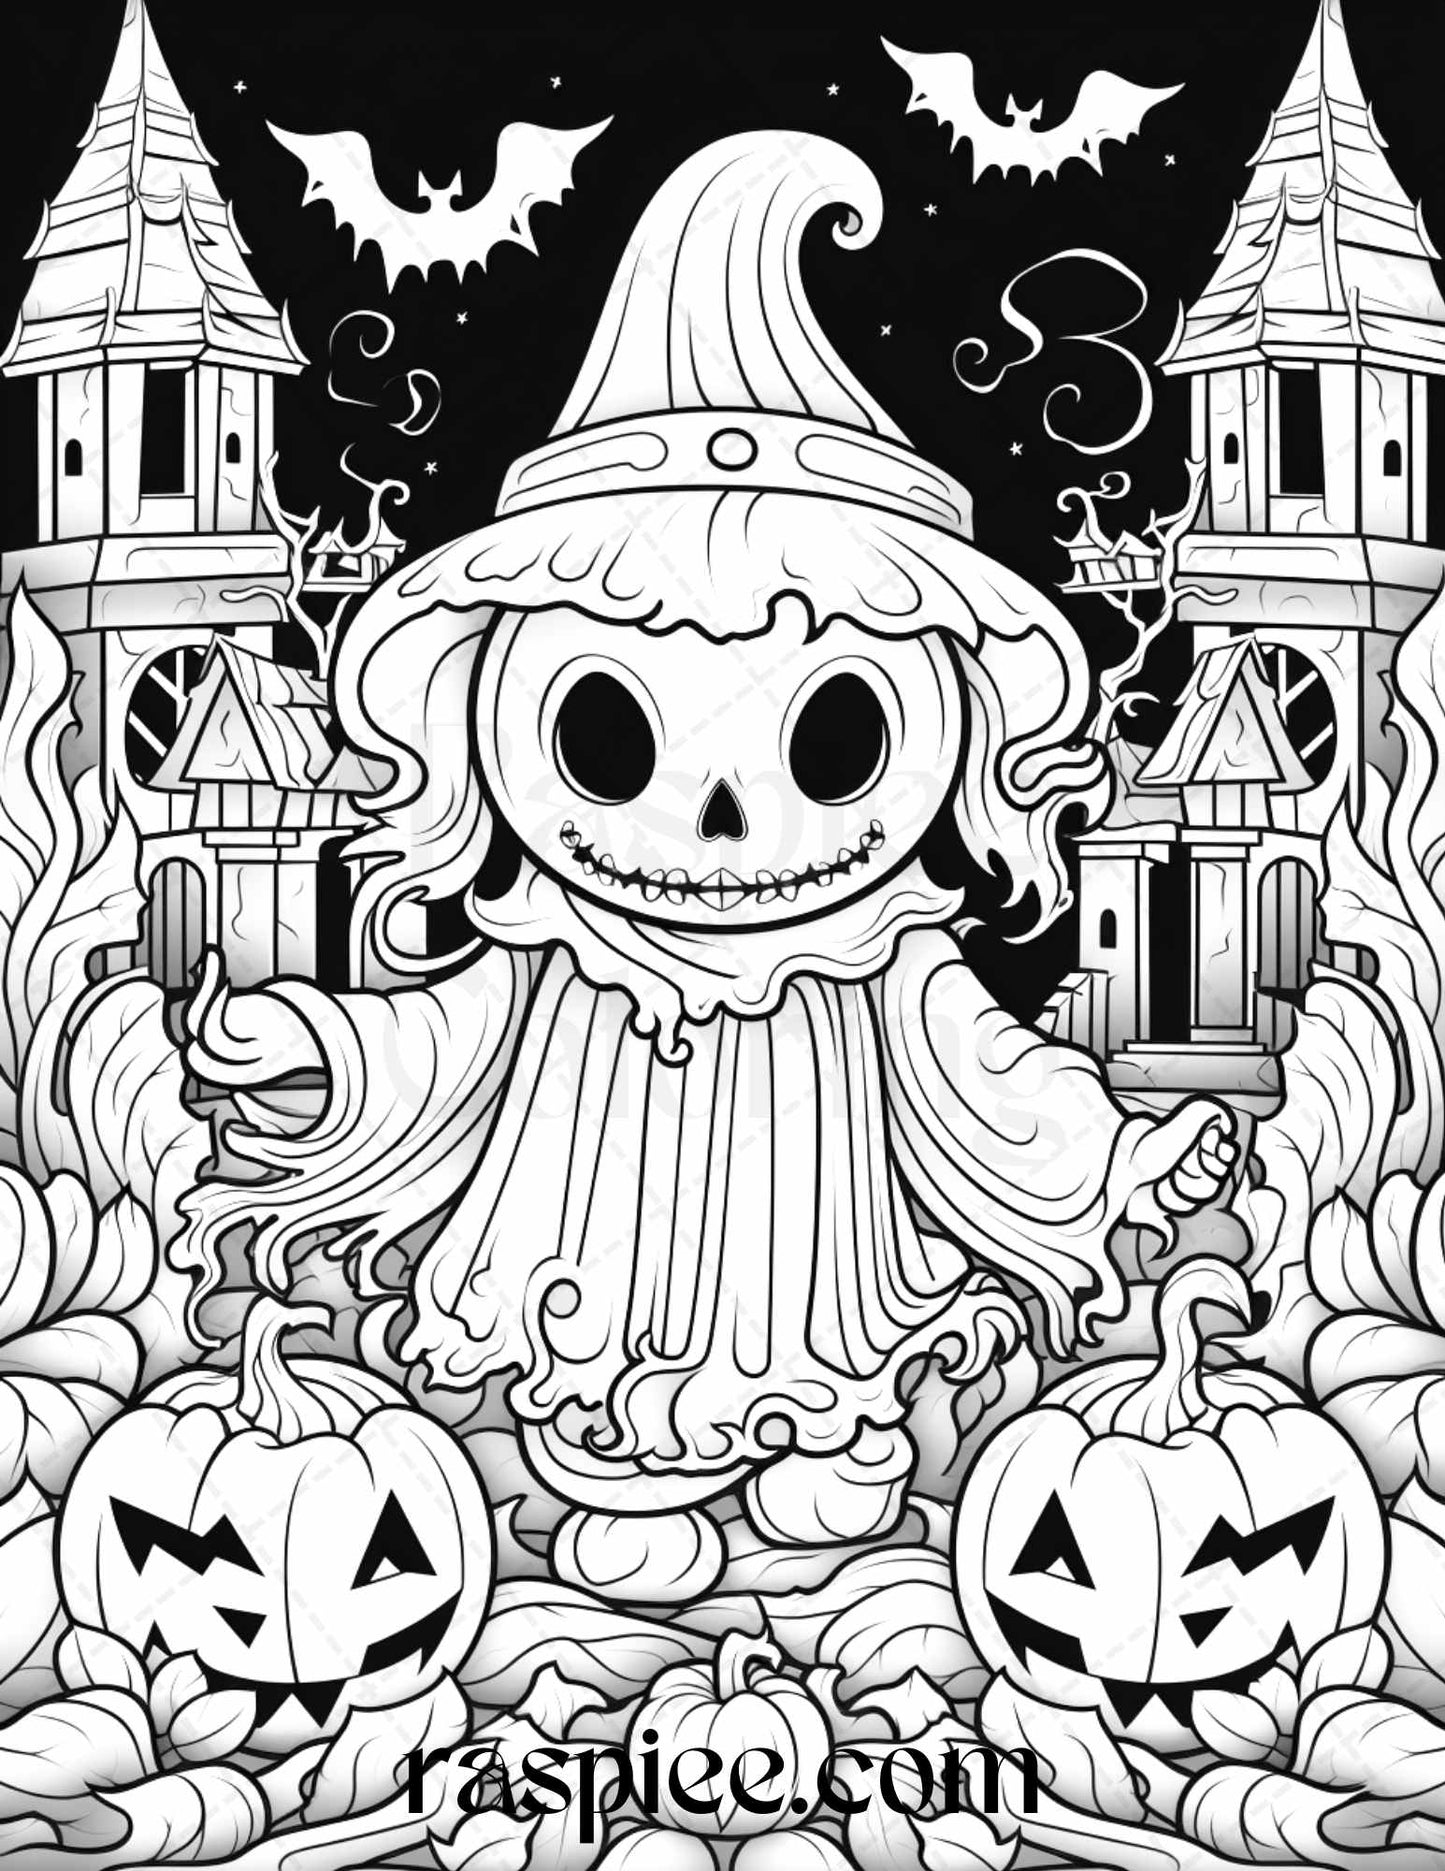 50 Halloween Cute Ghosts Grayscale Coloring Printable for Adults Kids, PDF File Instant Download - Raspiee Coloring